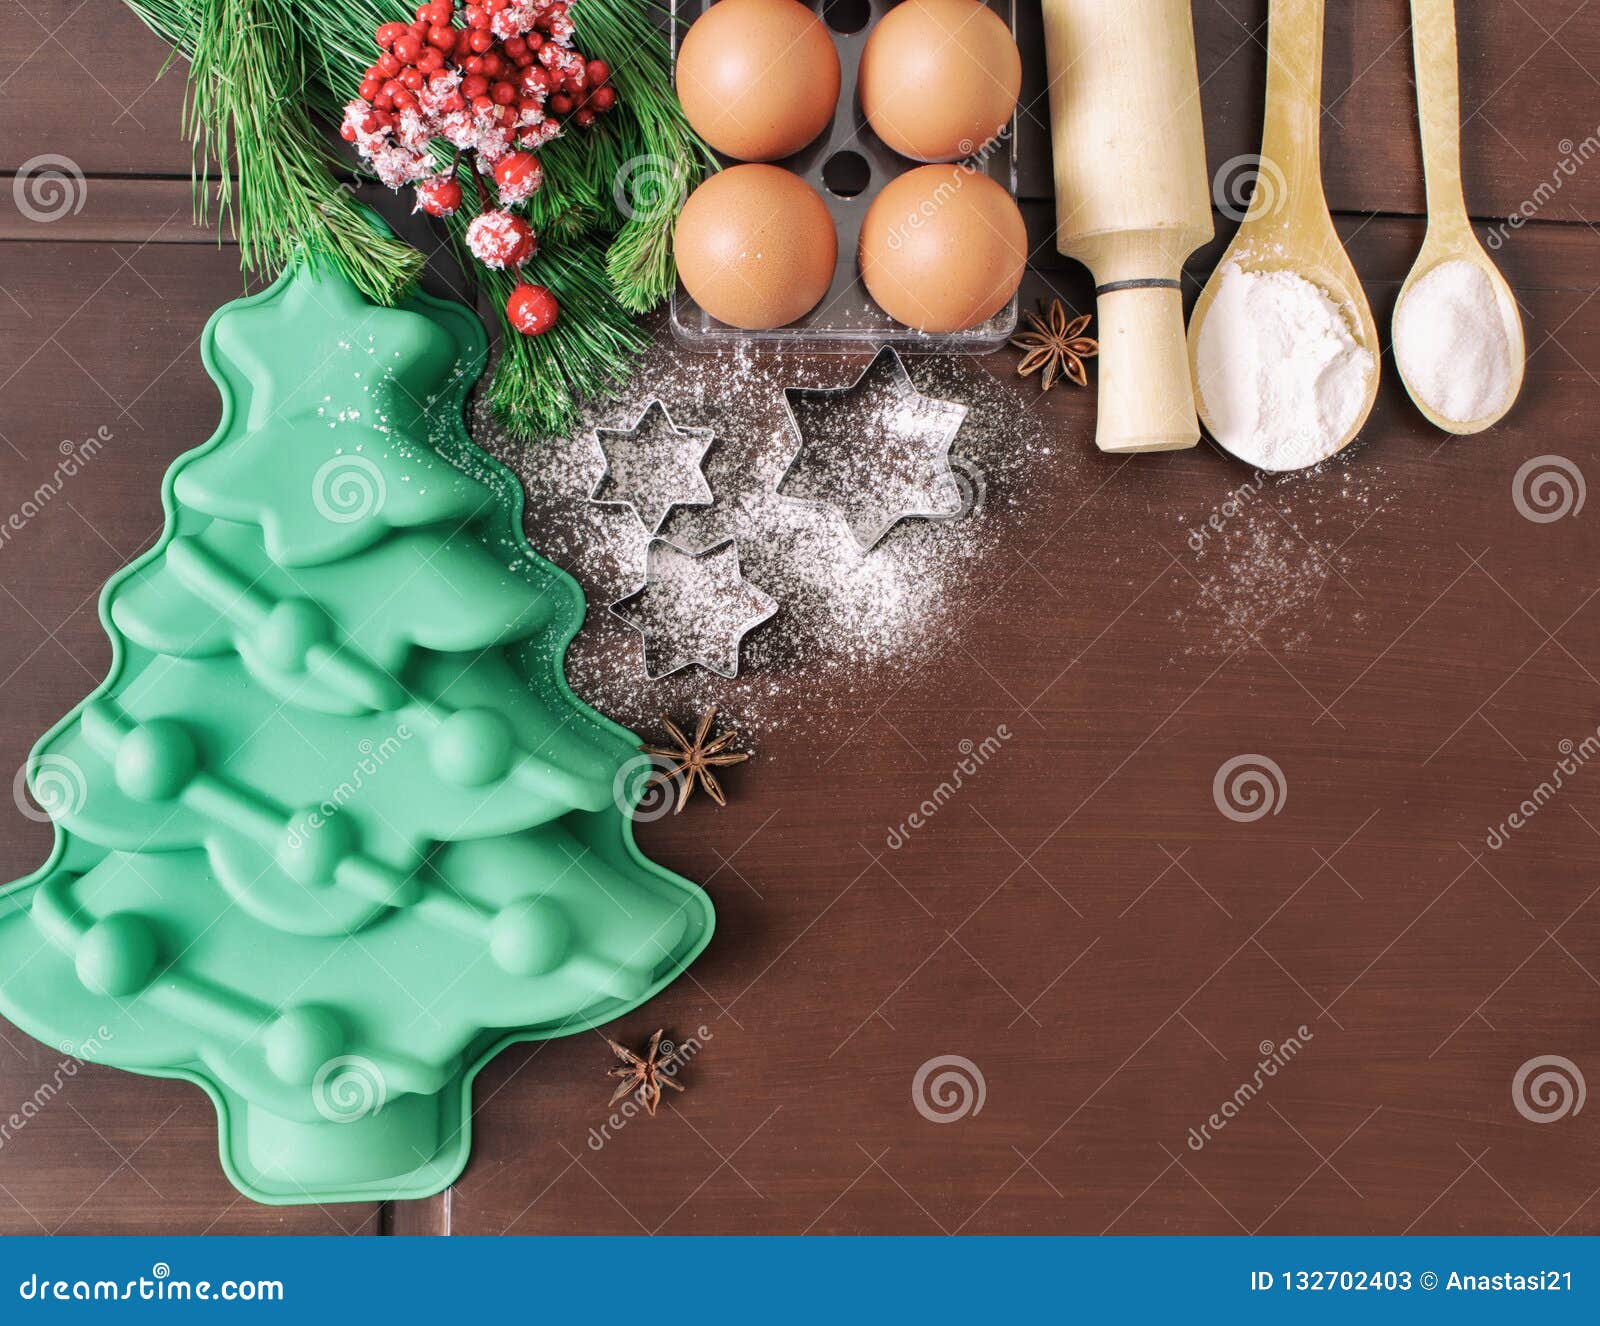 https://thumbs.dreamstime.com/z/christmas-baking-cake-background-ingredients-tools-flour-eggs-silicone-molds-shape-tree-rolling-pin-wooden-132702403.jpg